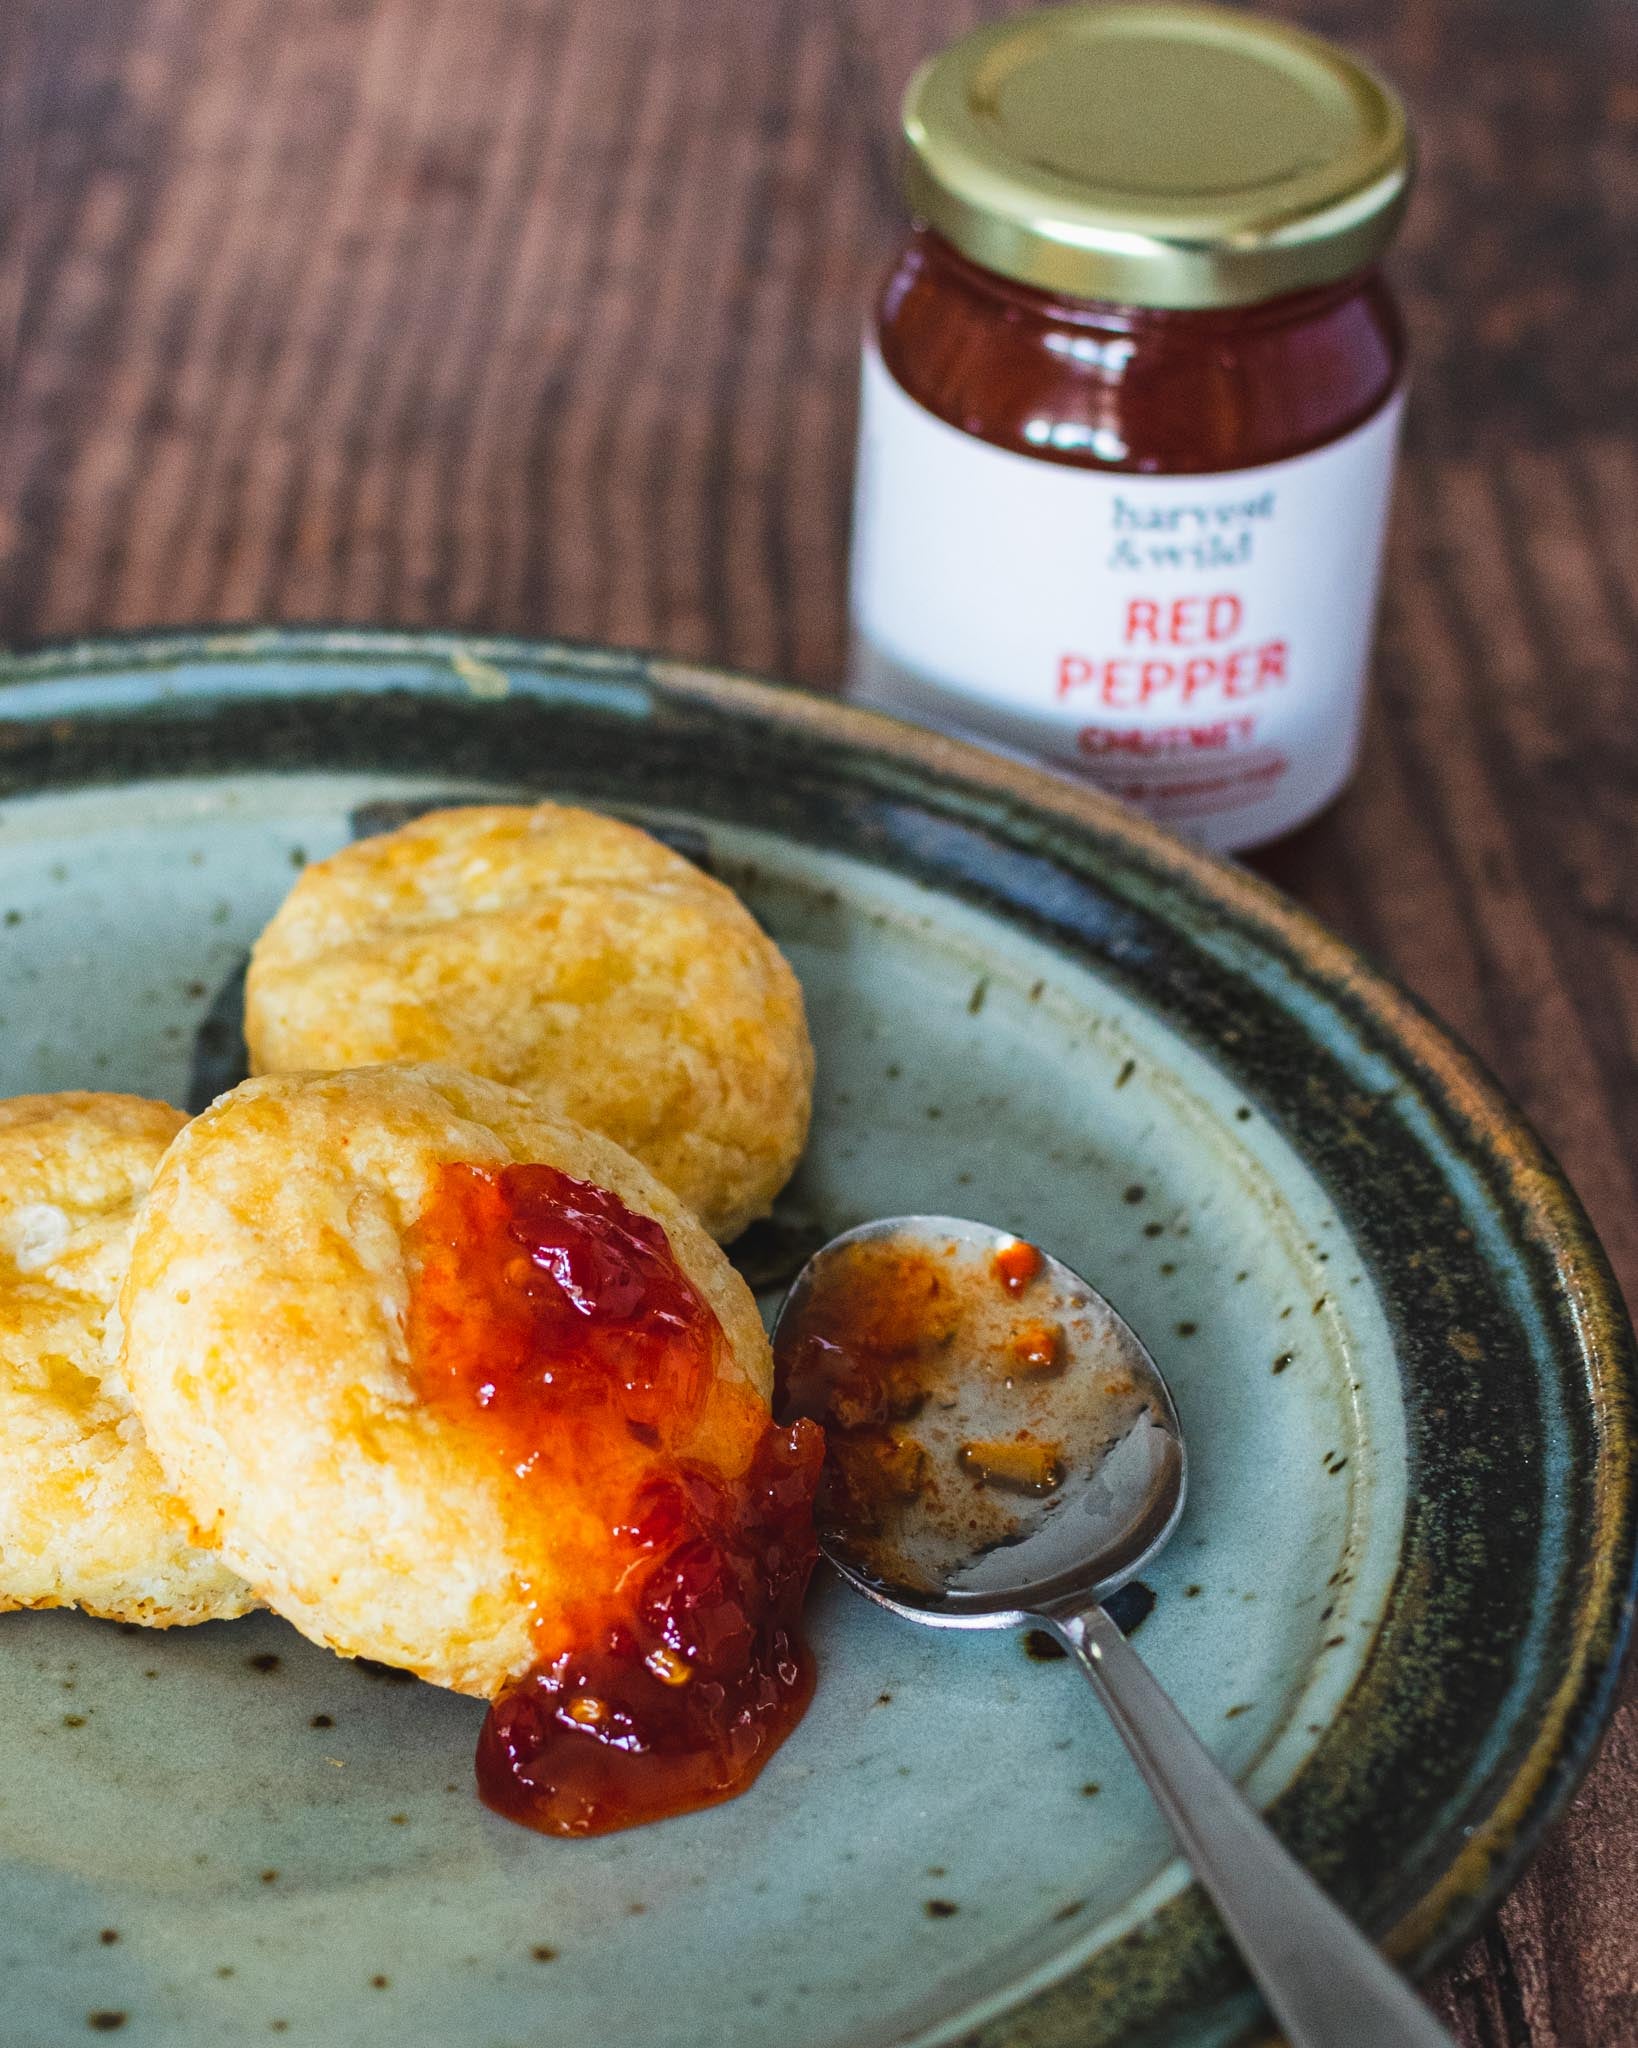 Red pepper chutney on a plate with cheese scones